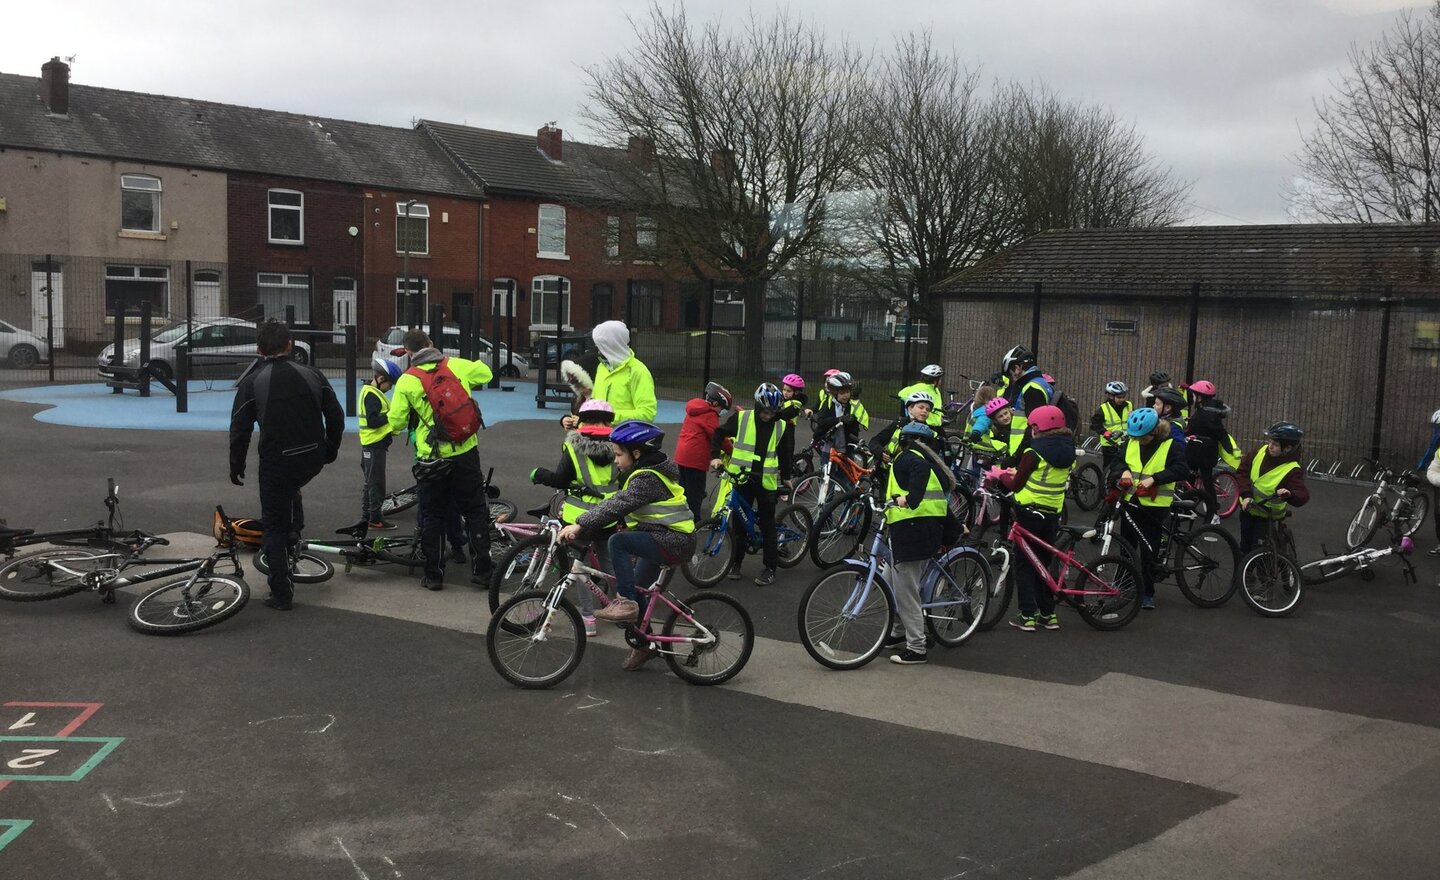 Image of Day 2 of Bikeability